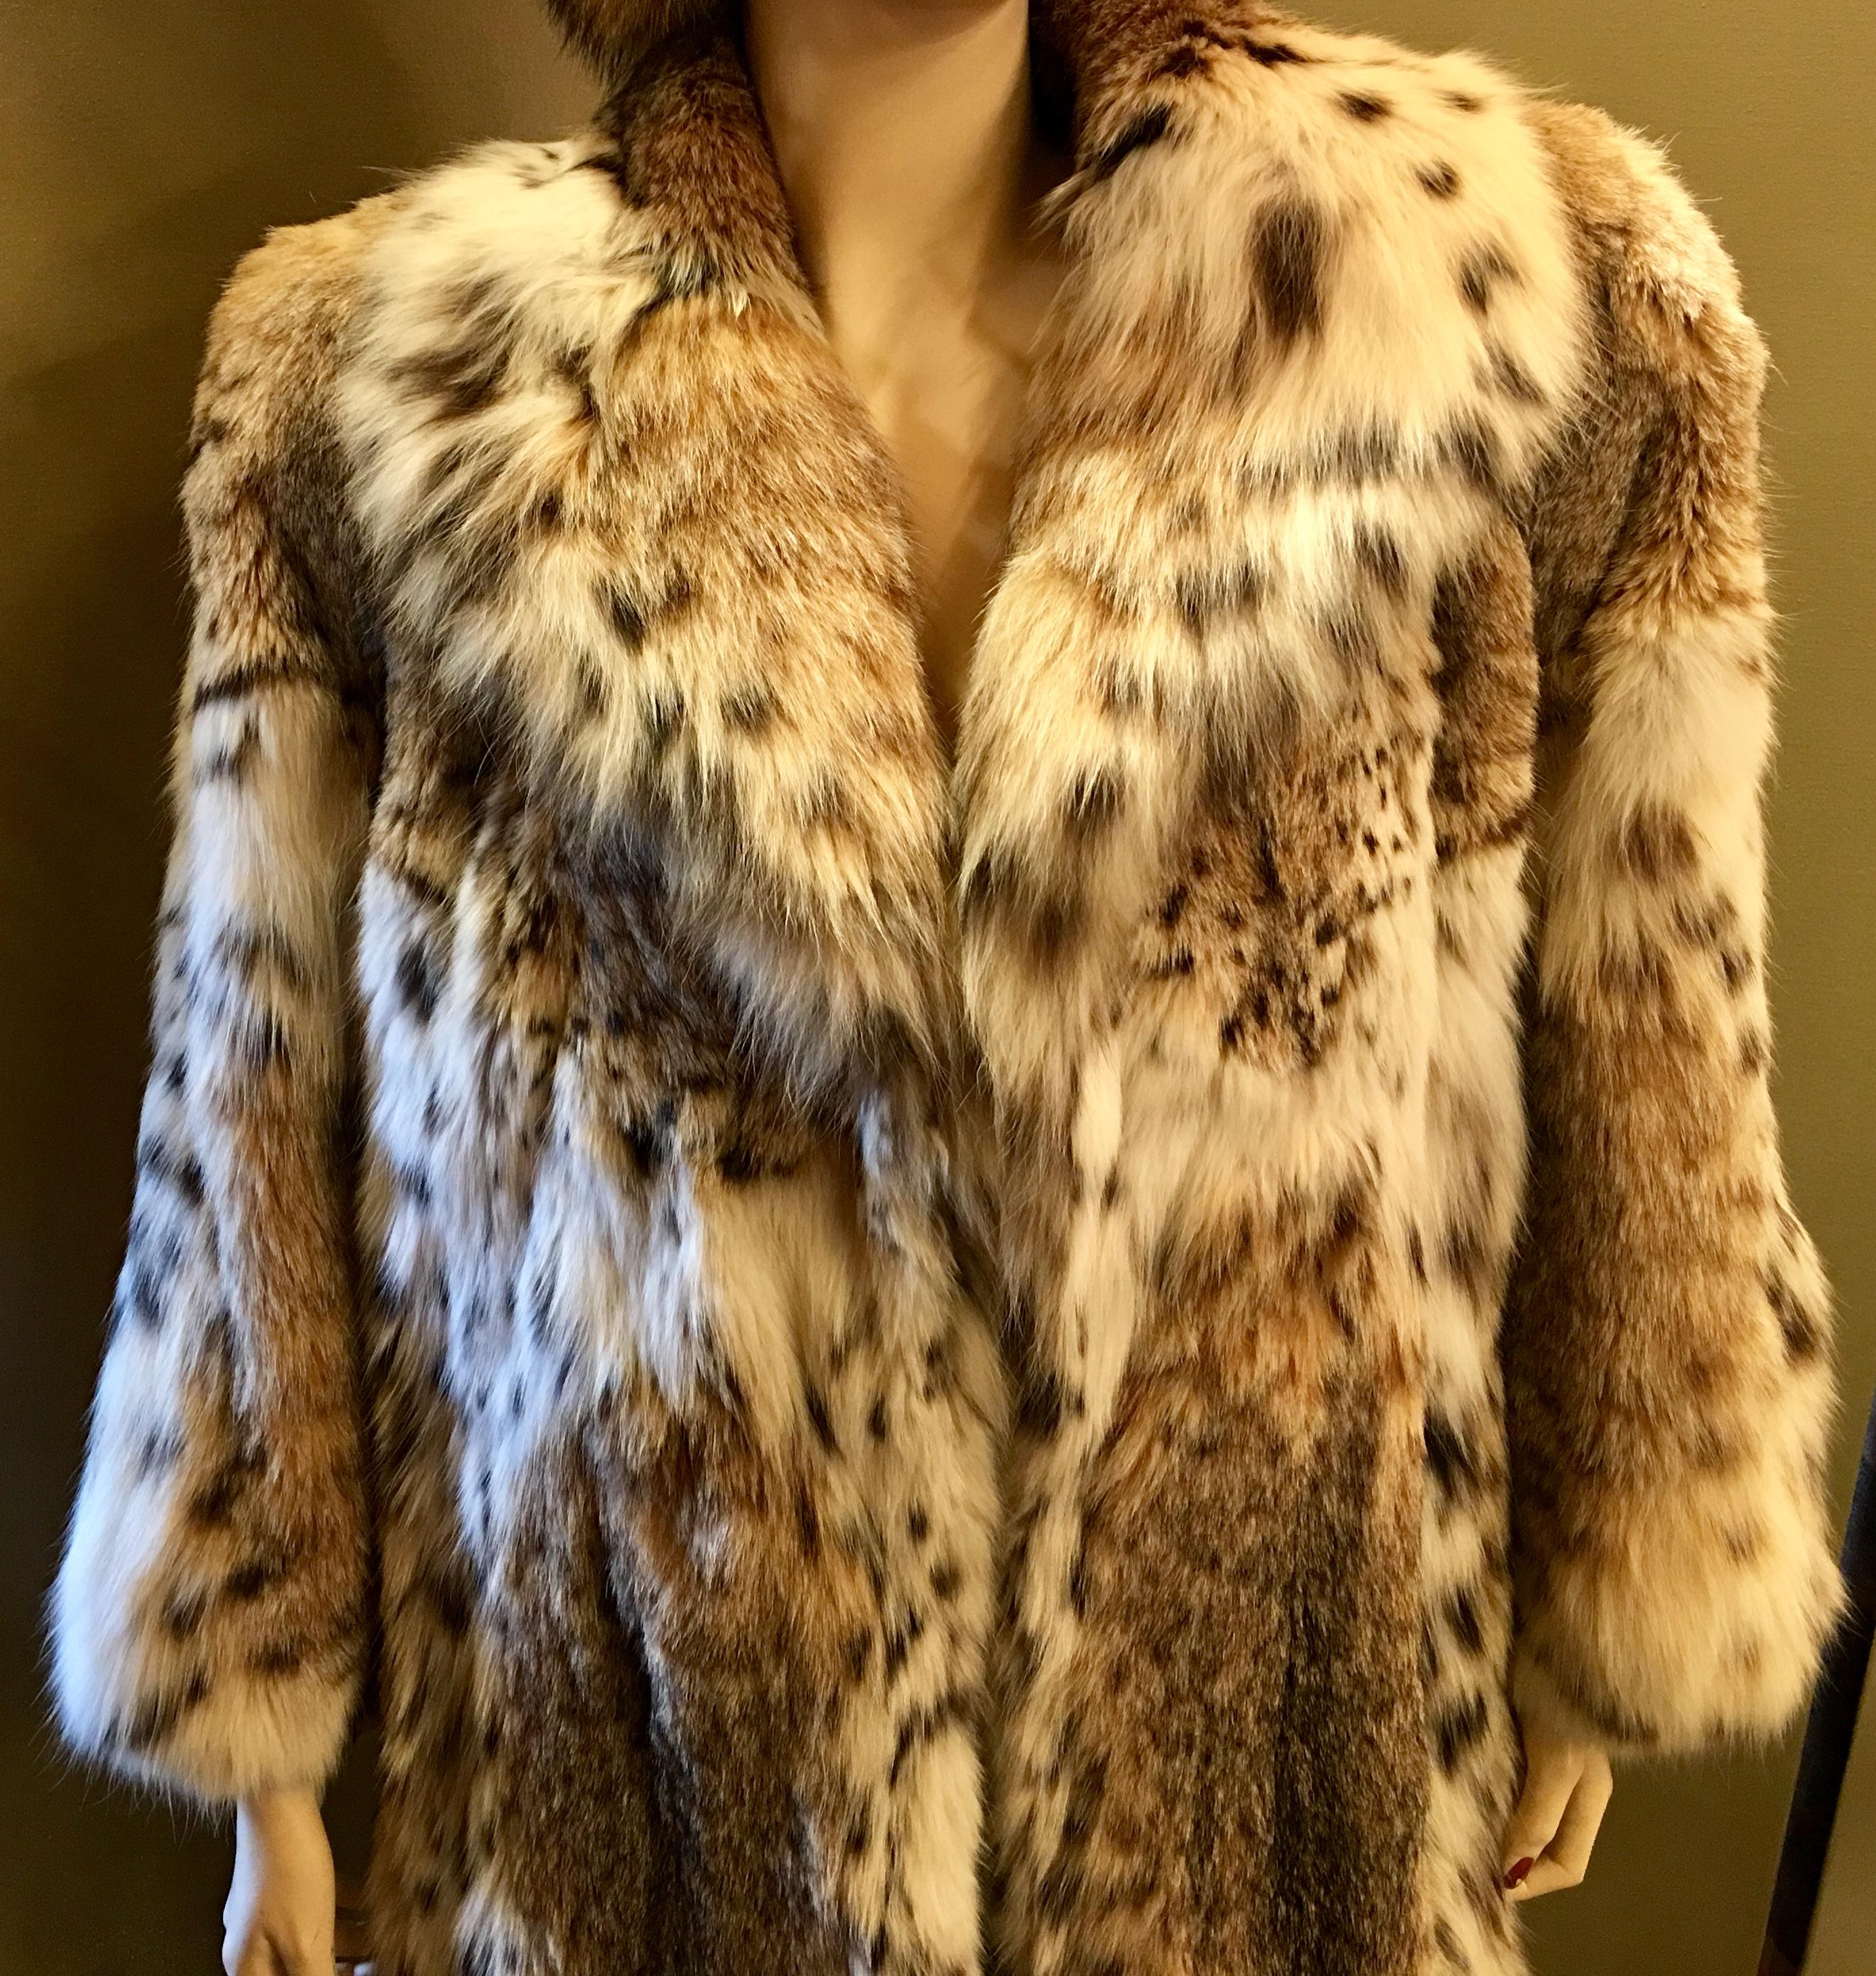 Gorgeous and very sexy, luxurious lynx coat is 3 quarter length of natural, ultra soft, spotted lynx fur with a large and stylish shawl collar. Coat features 2 velvet lined slash pockets and closes with 3 hooks and eyes.

Lynx fur is distinctively